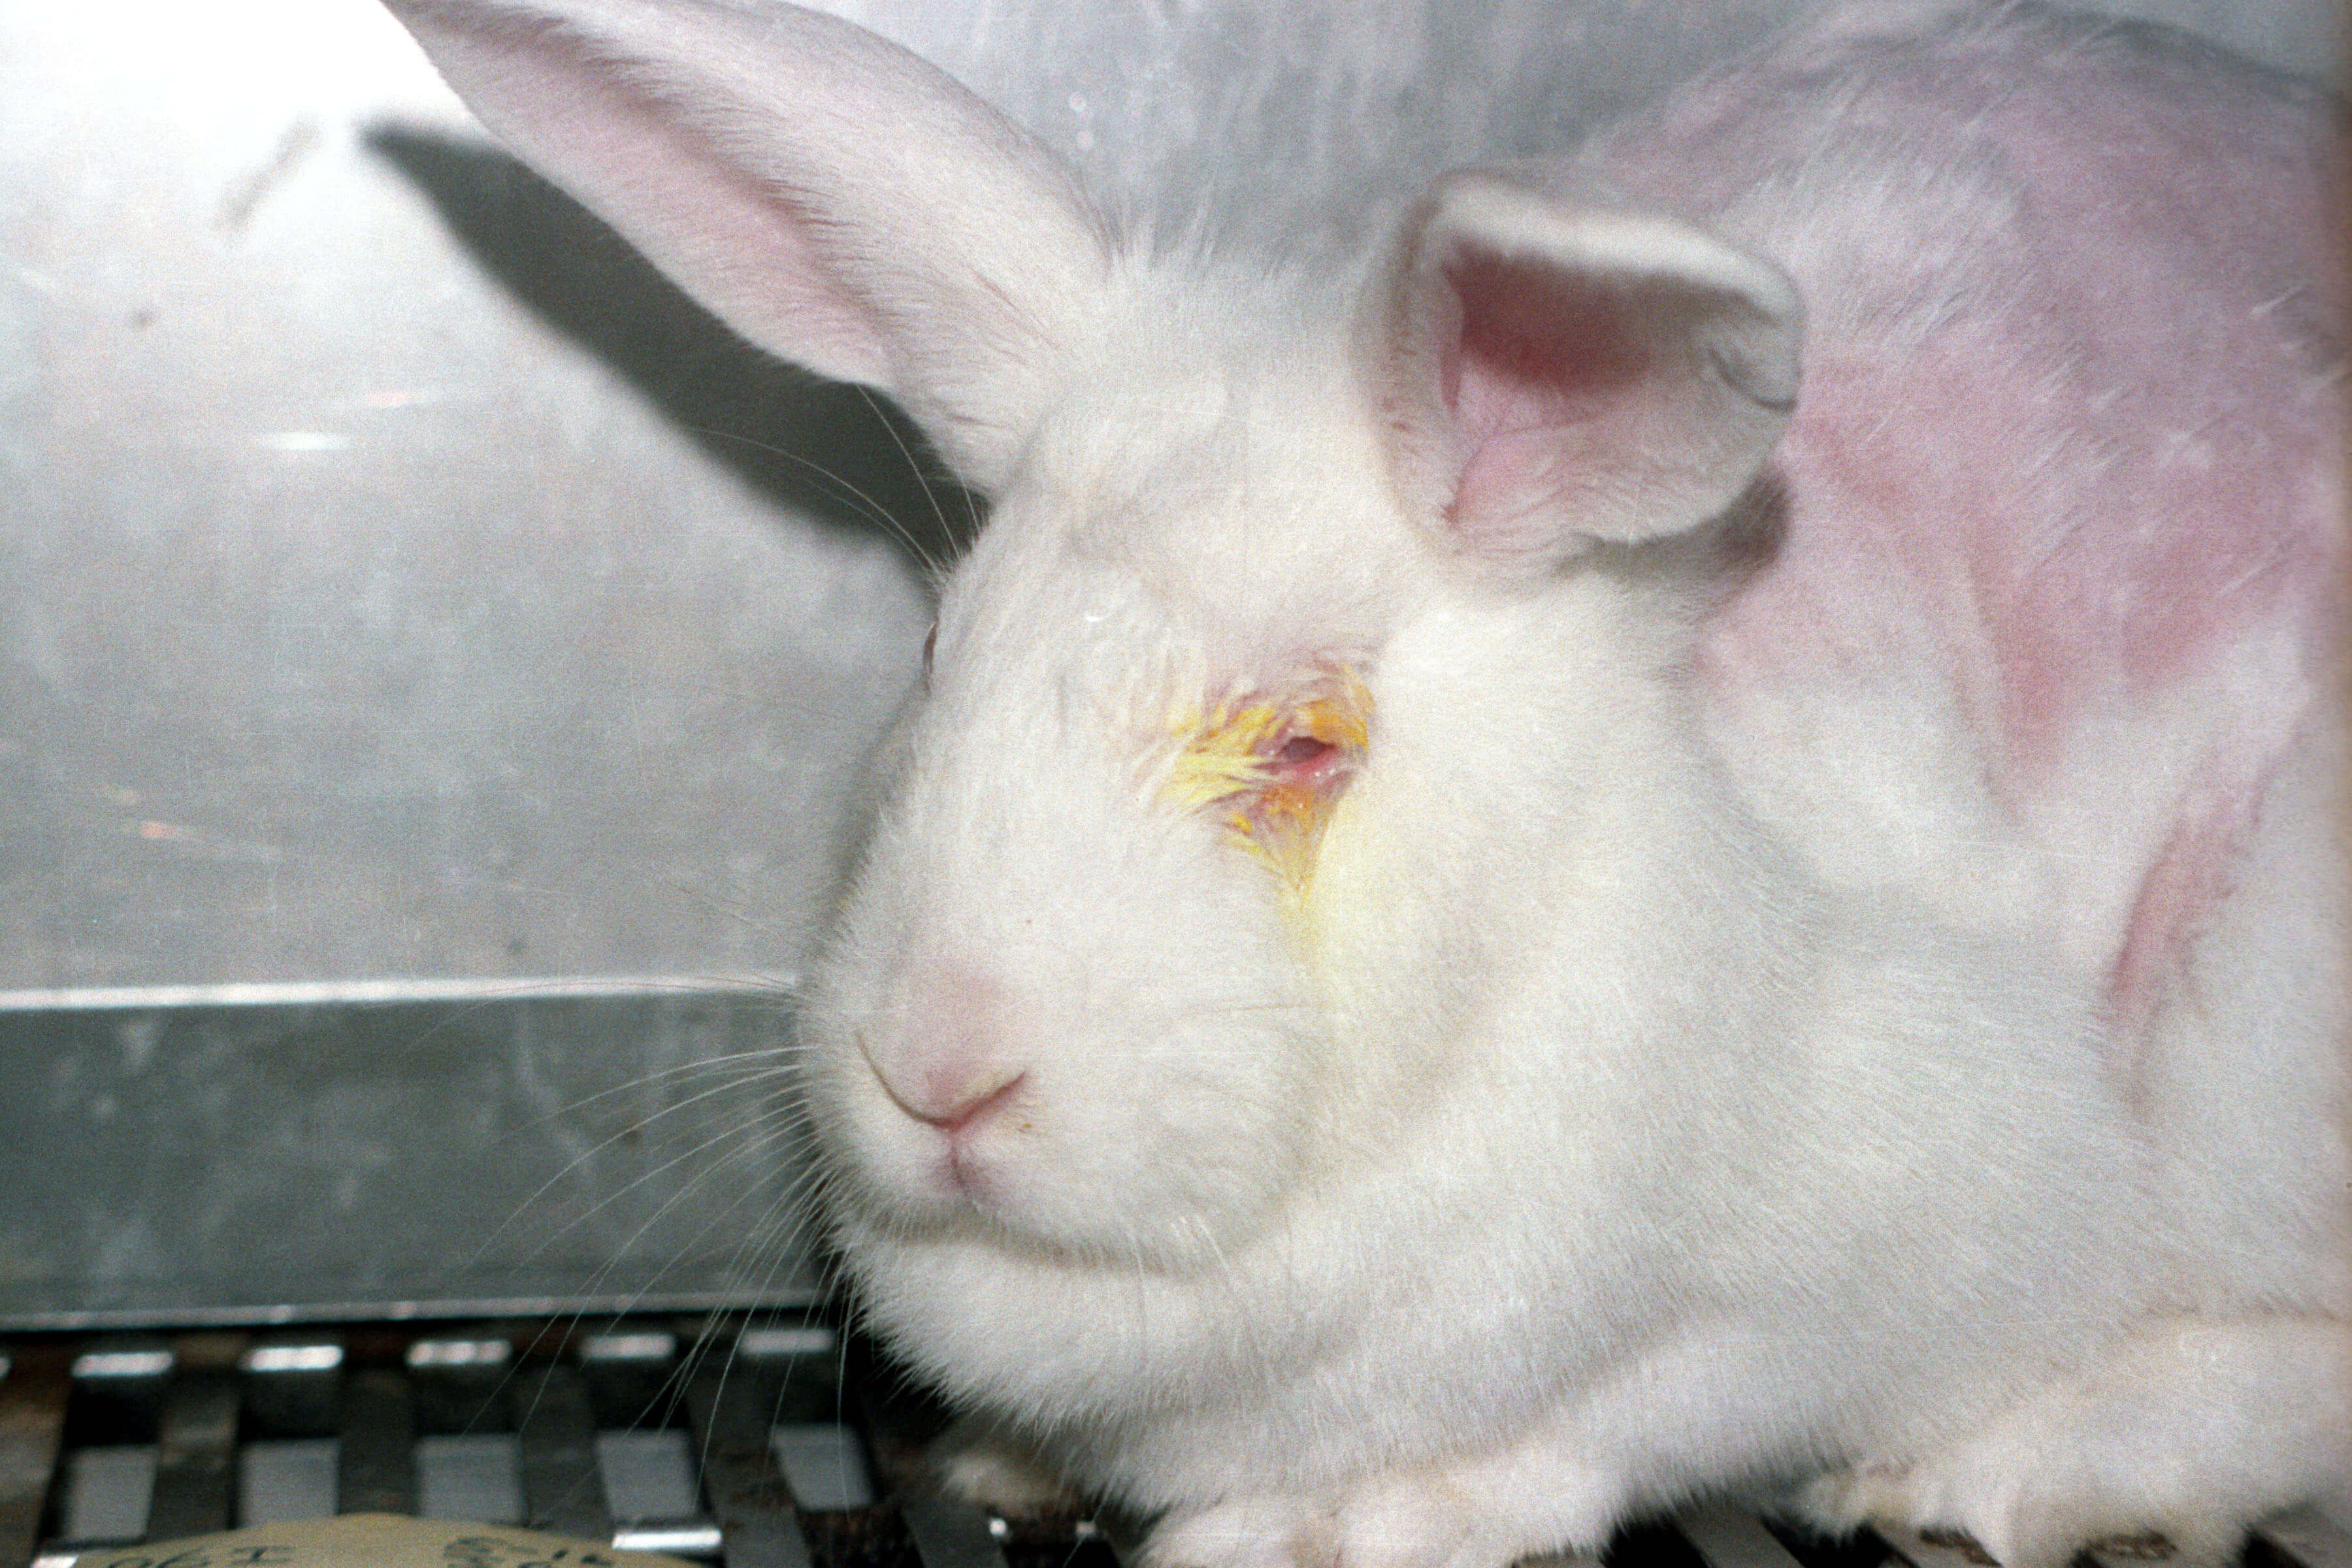 cons for animal testing on cosmetics